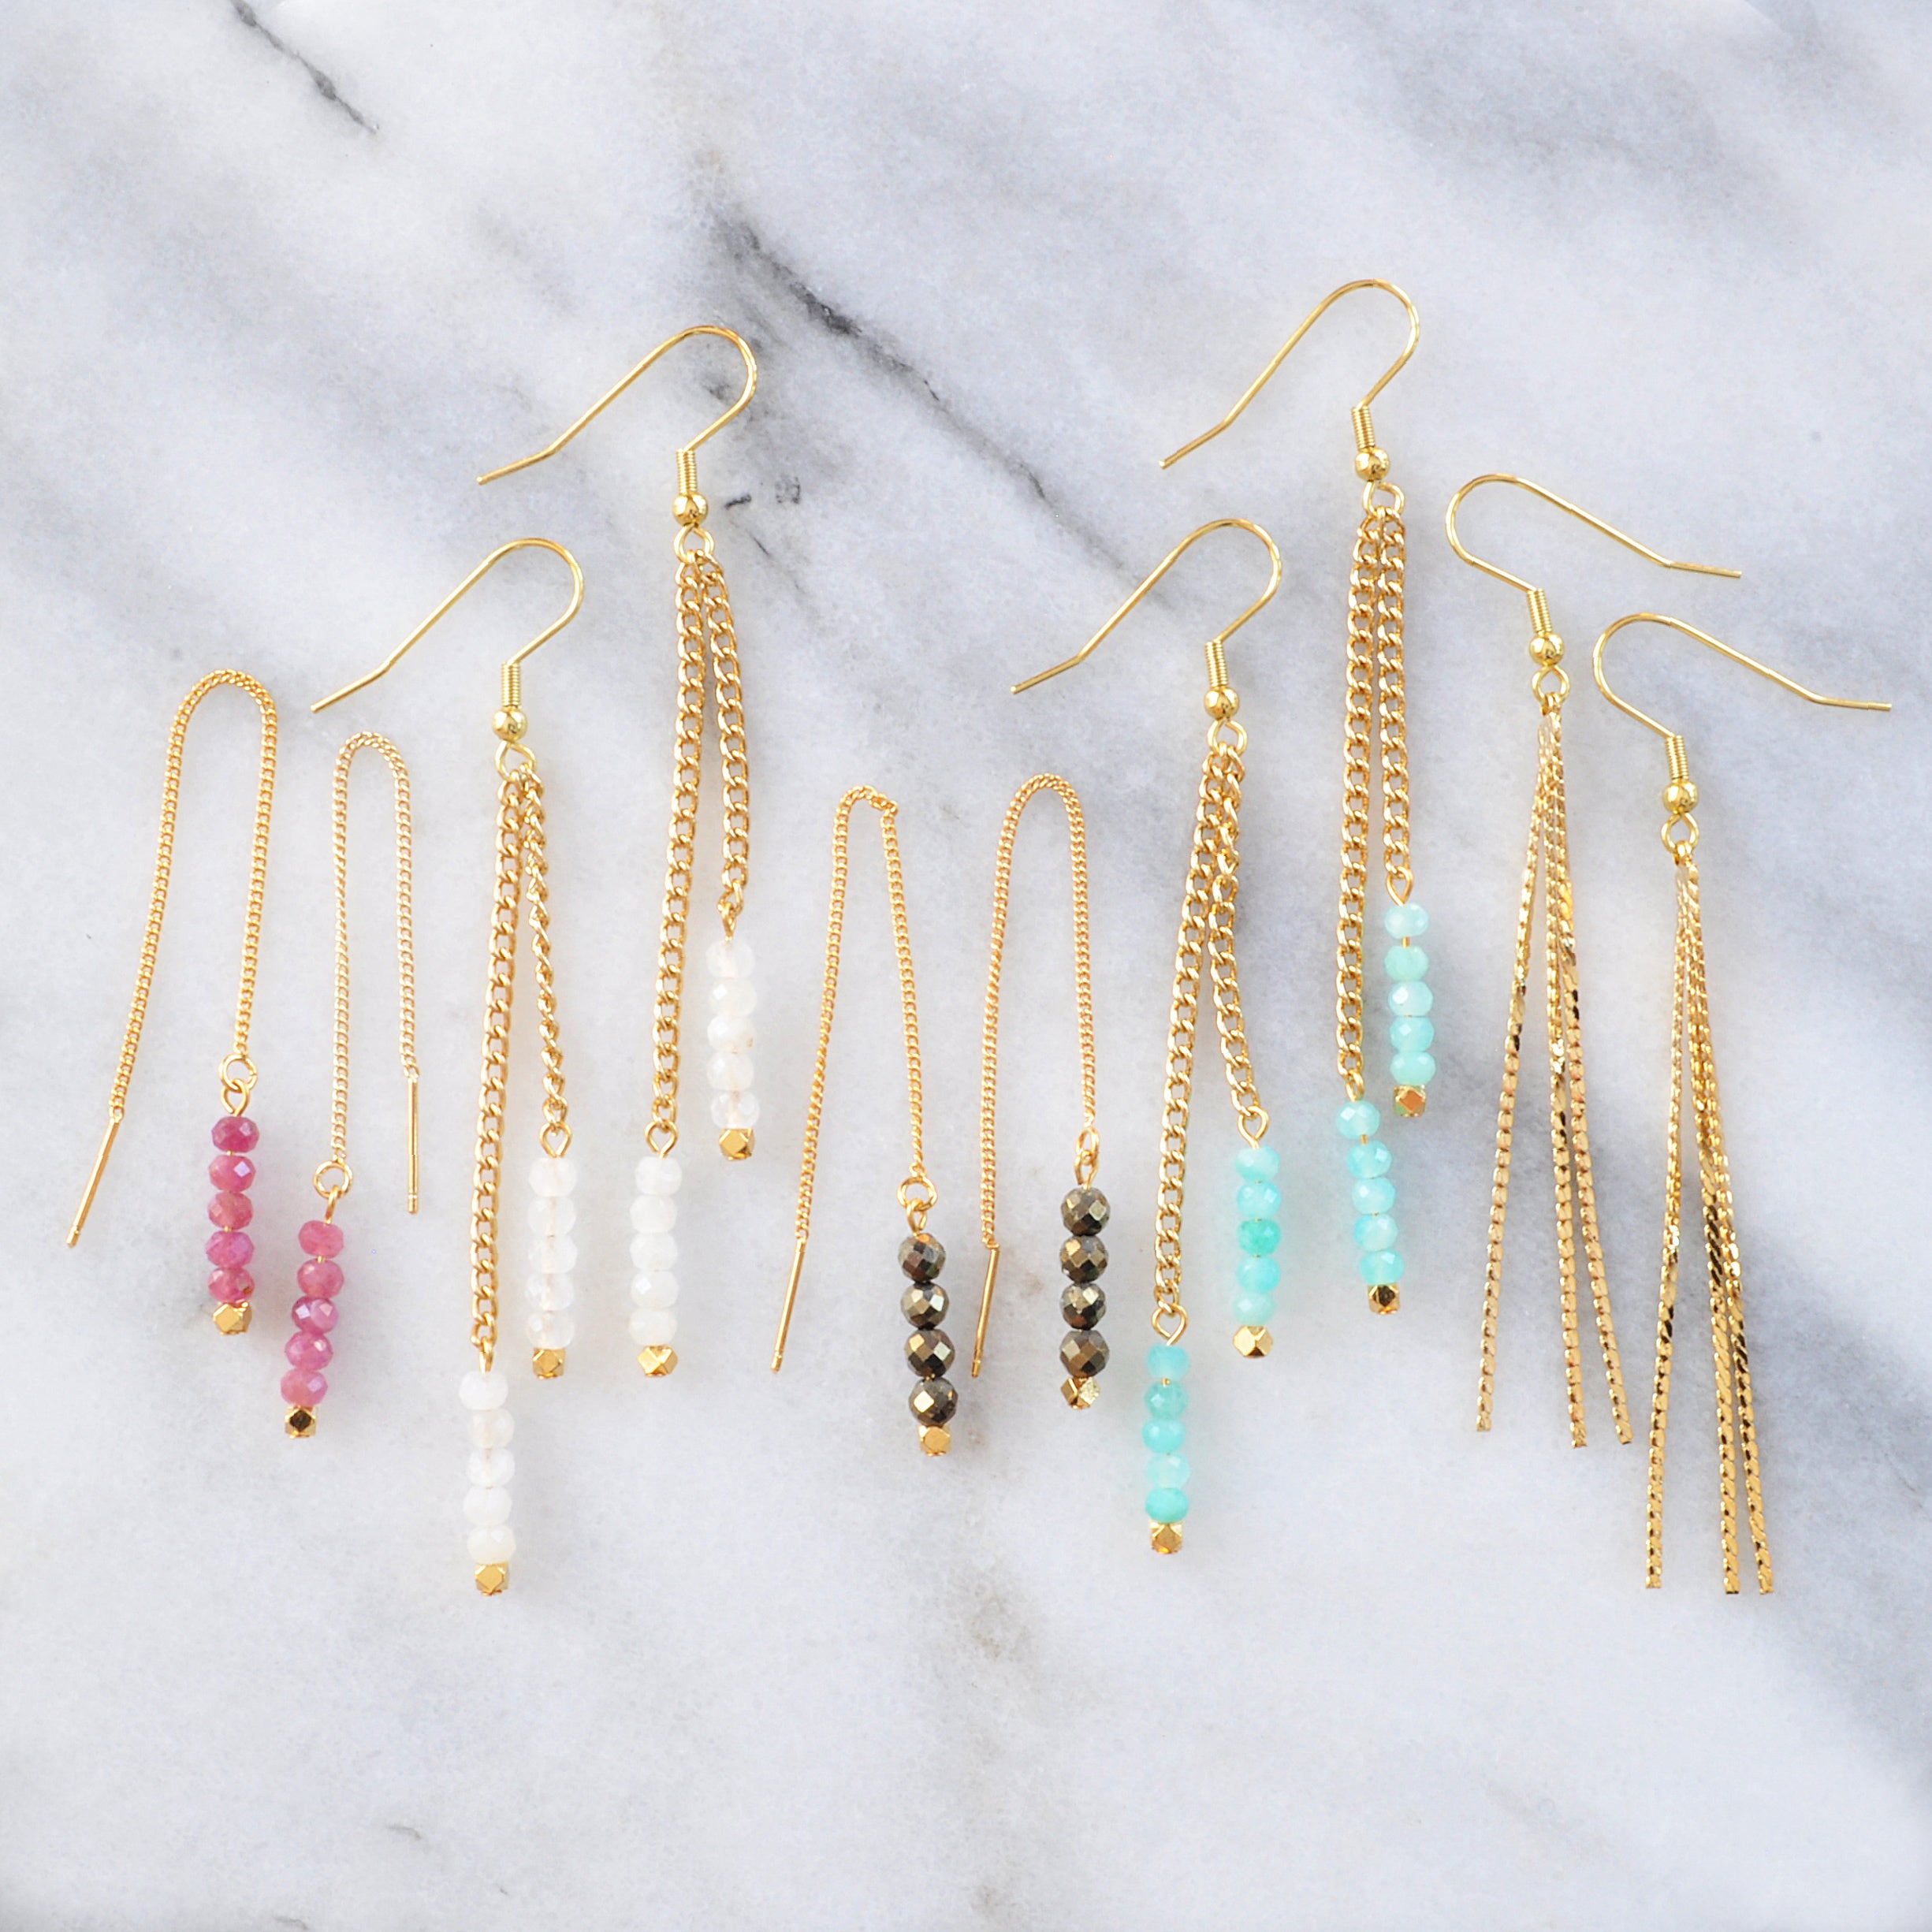 Libby & Smee Gemstone Gold chain Earrings available in various styles